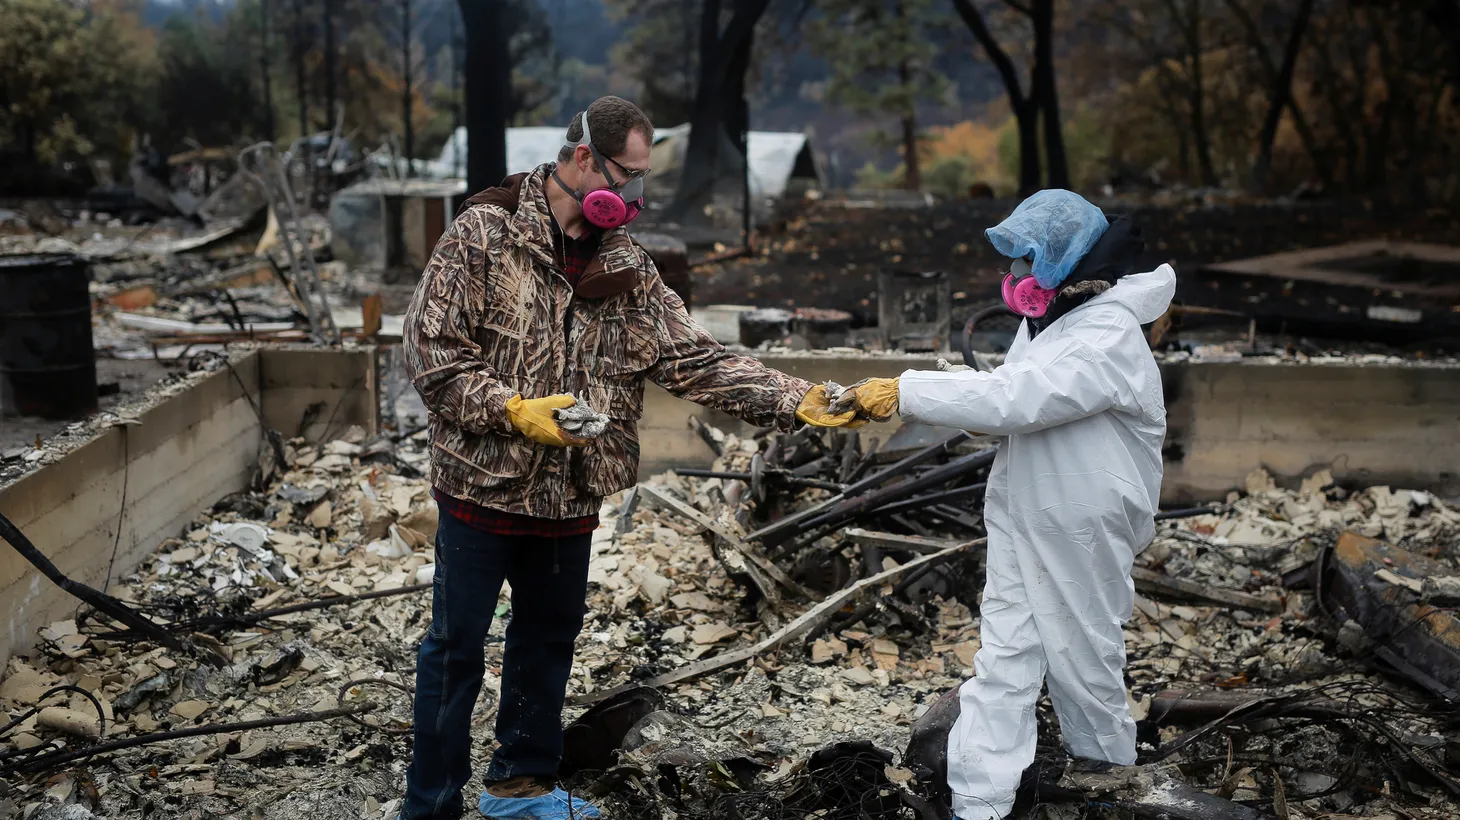 Vanthy Bizzle hands small religious figurines to her husband Brett Bizzle from the remains of their home, after returning for the first time since the Camp Fire forced them to evacuate in Paradise, California, U.S. November 22, 2018.